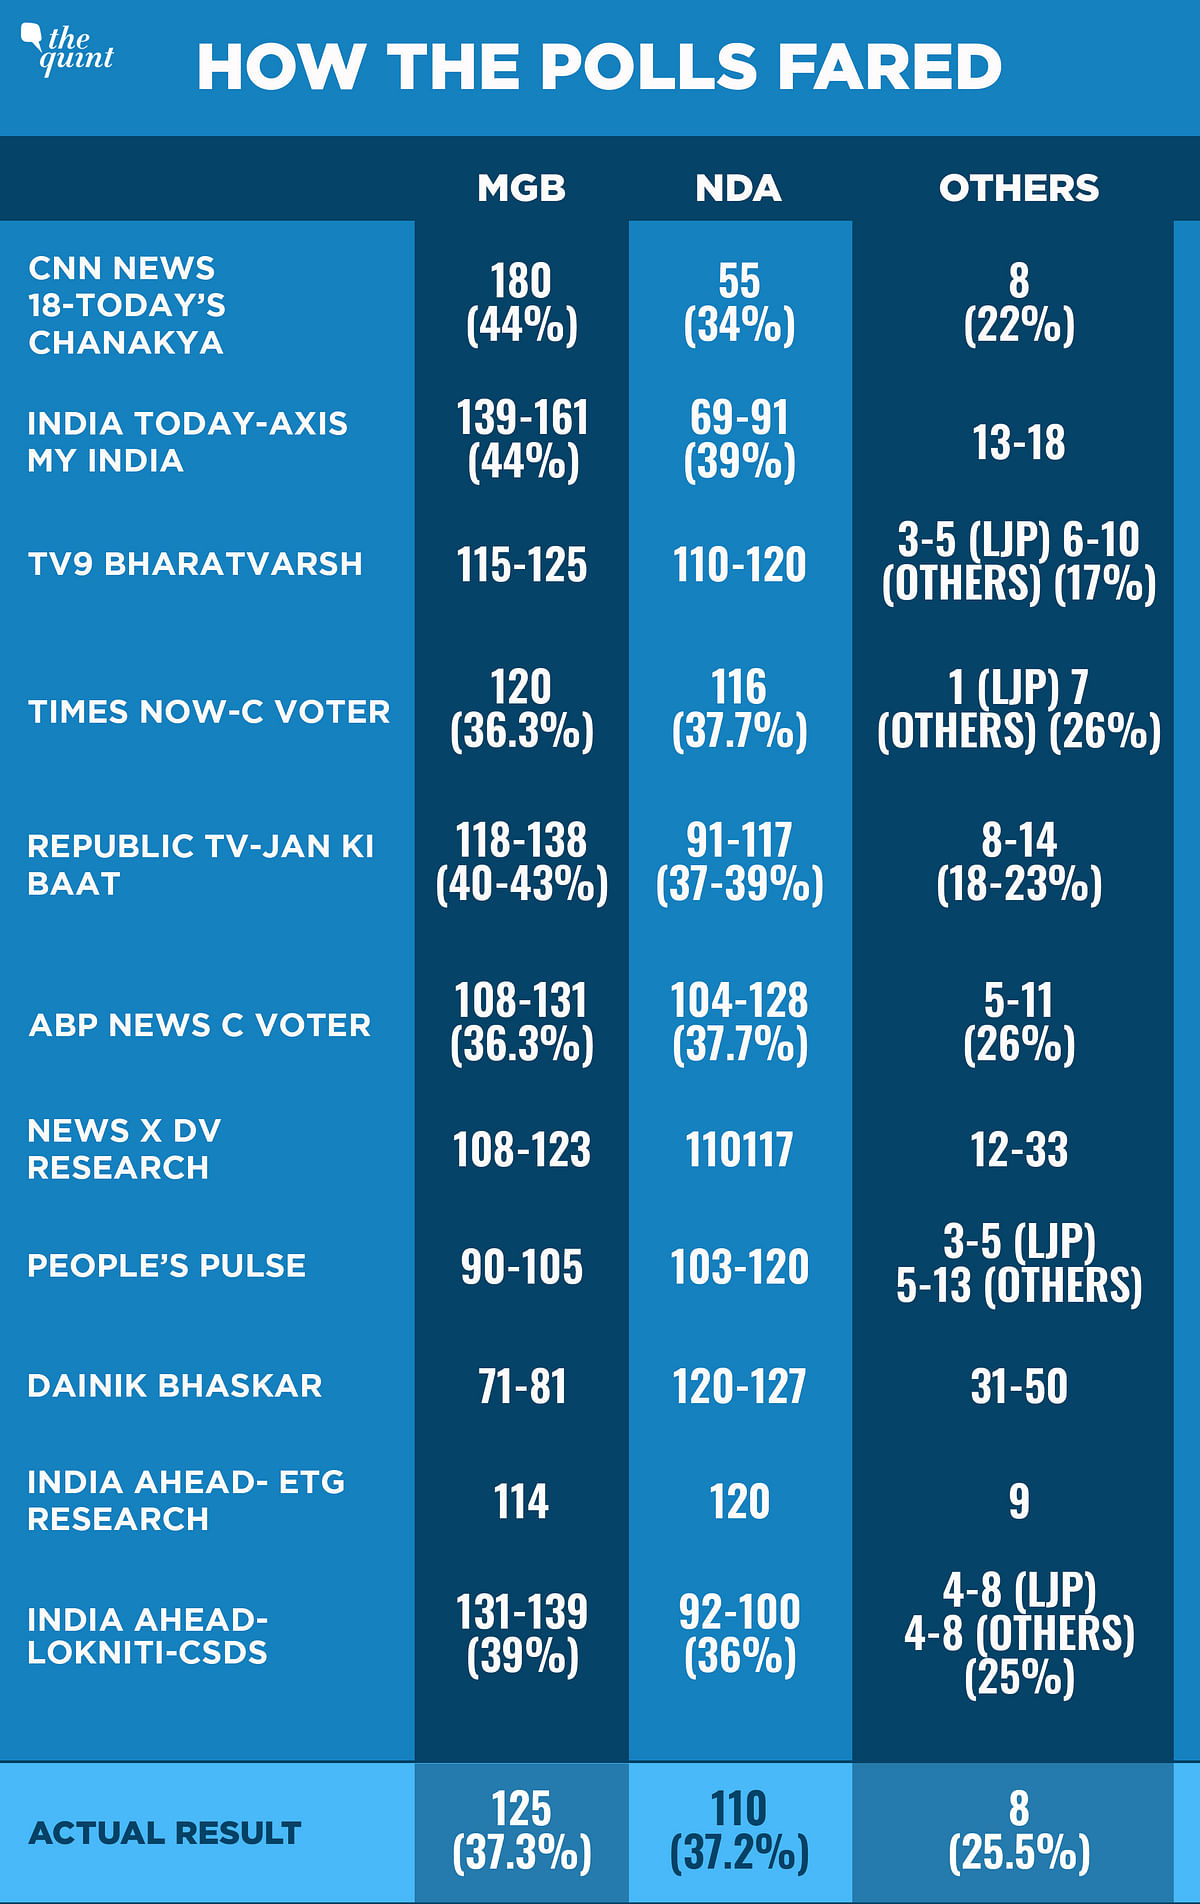 If indeed, as many claim, exit polls are ‘fake’ or ‘of no use’, then why do viewers stay glued to exit polls on TV? 